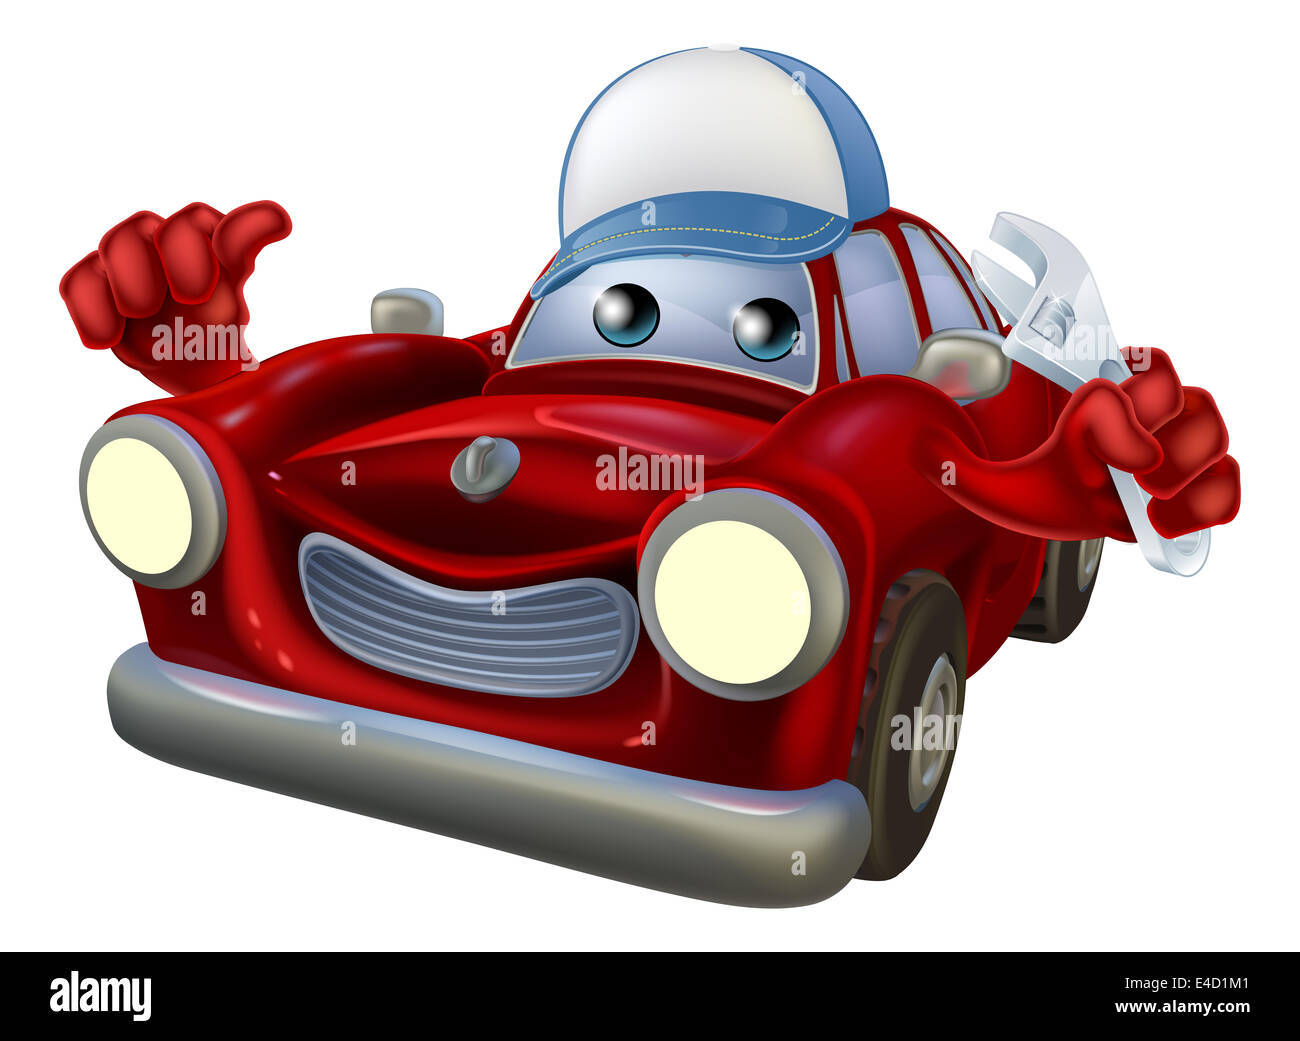 An illustration of a red cartoon car character wearing a cap and holding a spanner while giving a thumbs up. Stock Photo